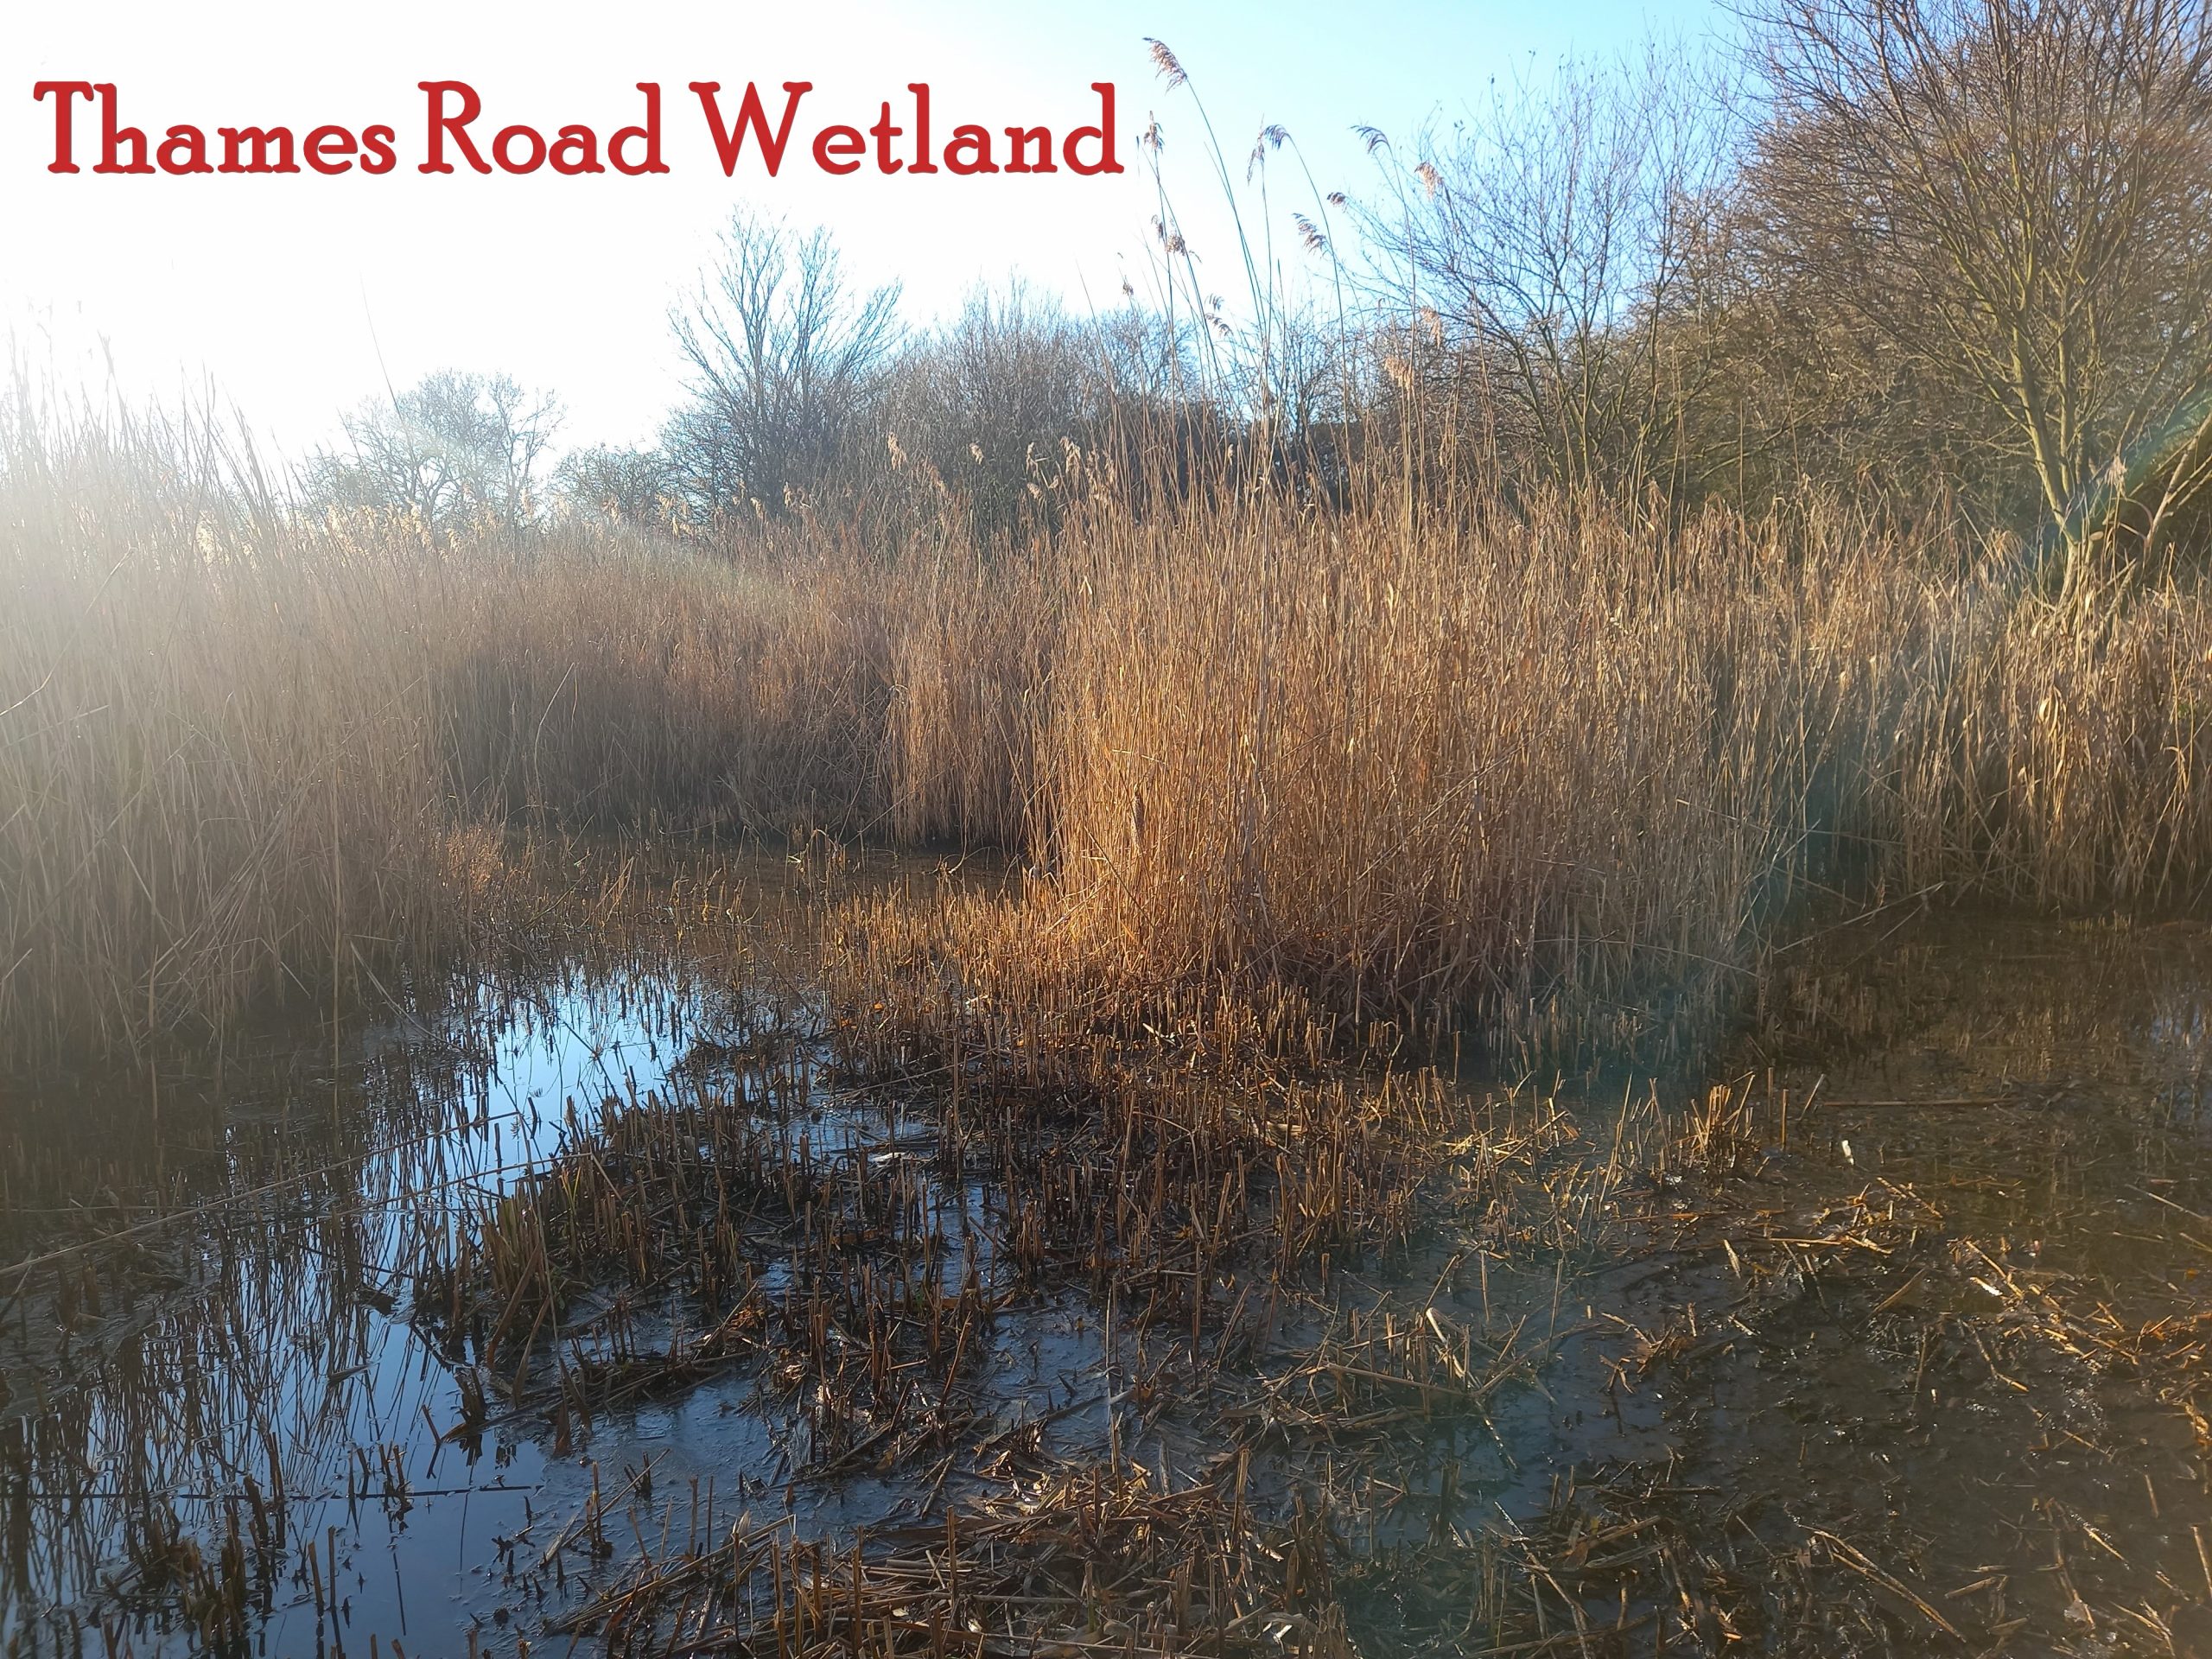 Reedbeds in the sun - Thames Road Wetland